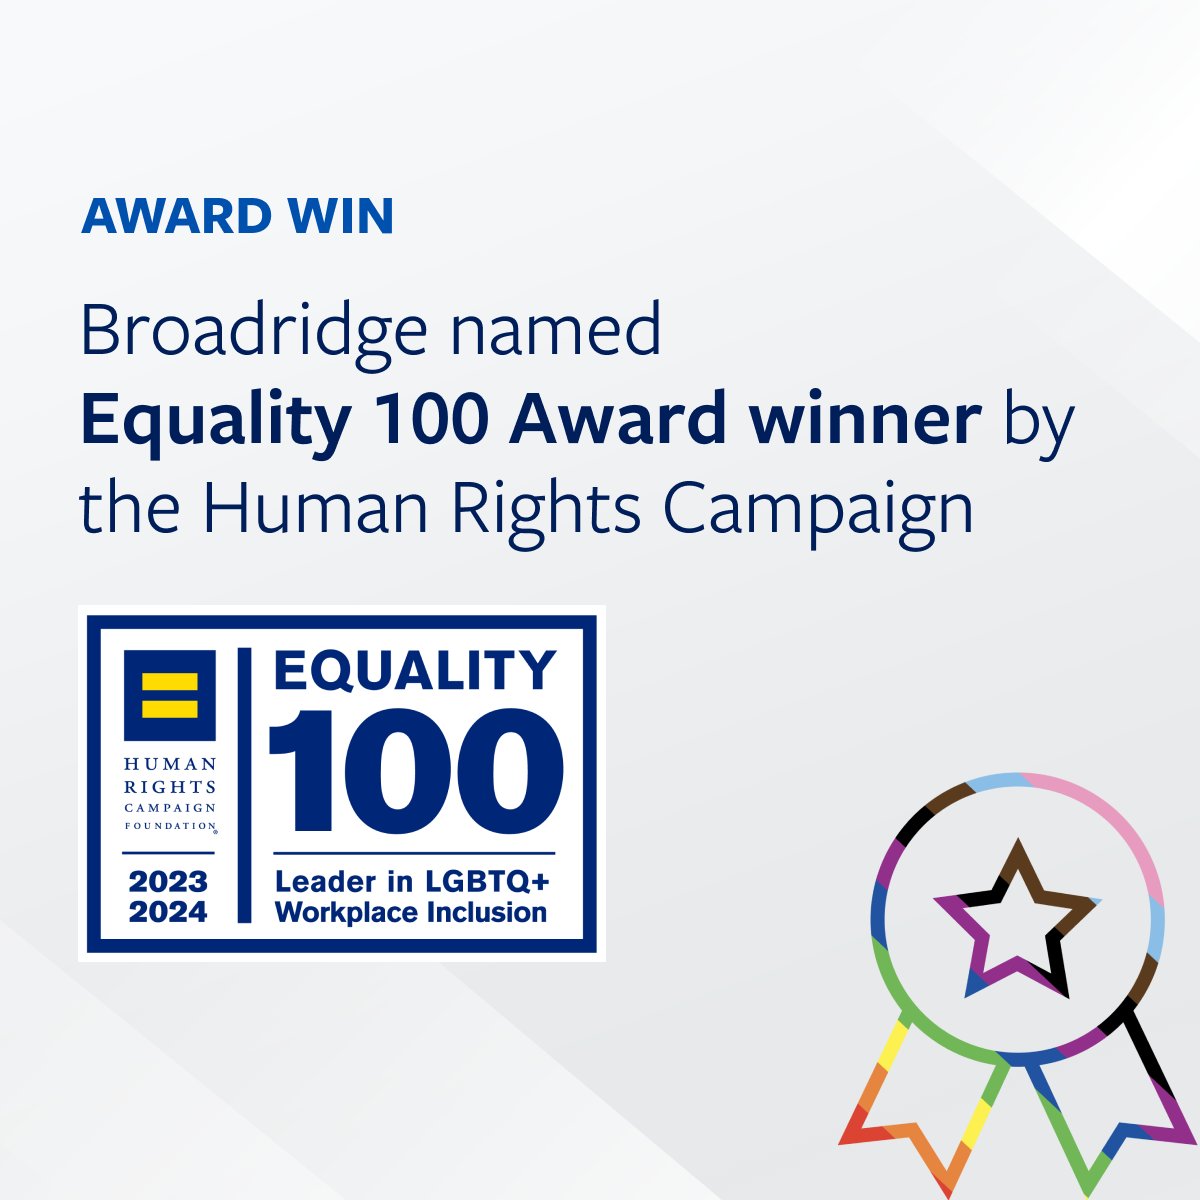 We’re proud to have scored 100 on the Human Rights Campaign Foundation's Corporate Equality Index, receiving the Equality 100 Award, for the 11th consecutive year.